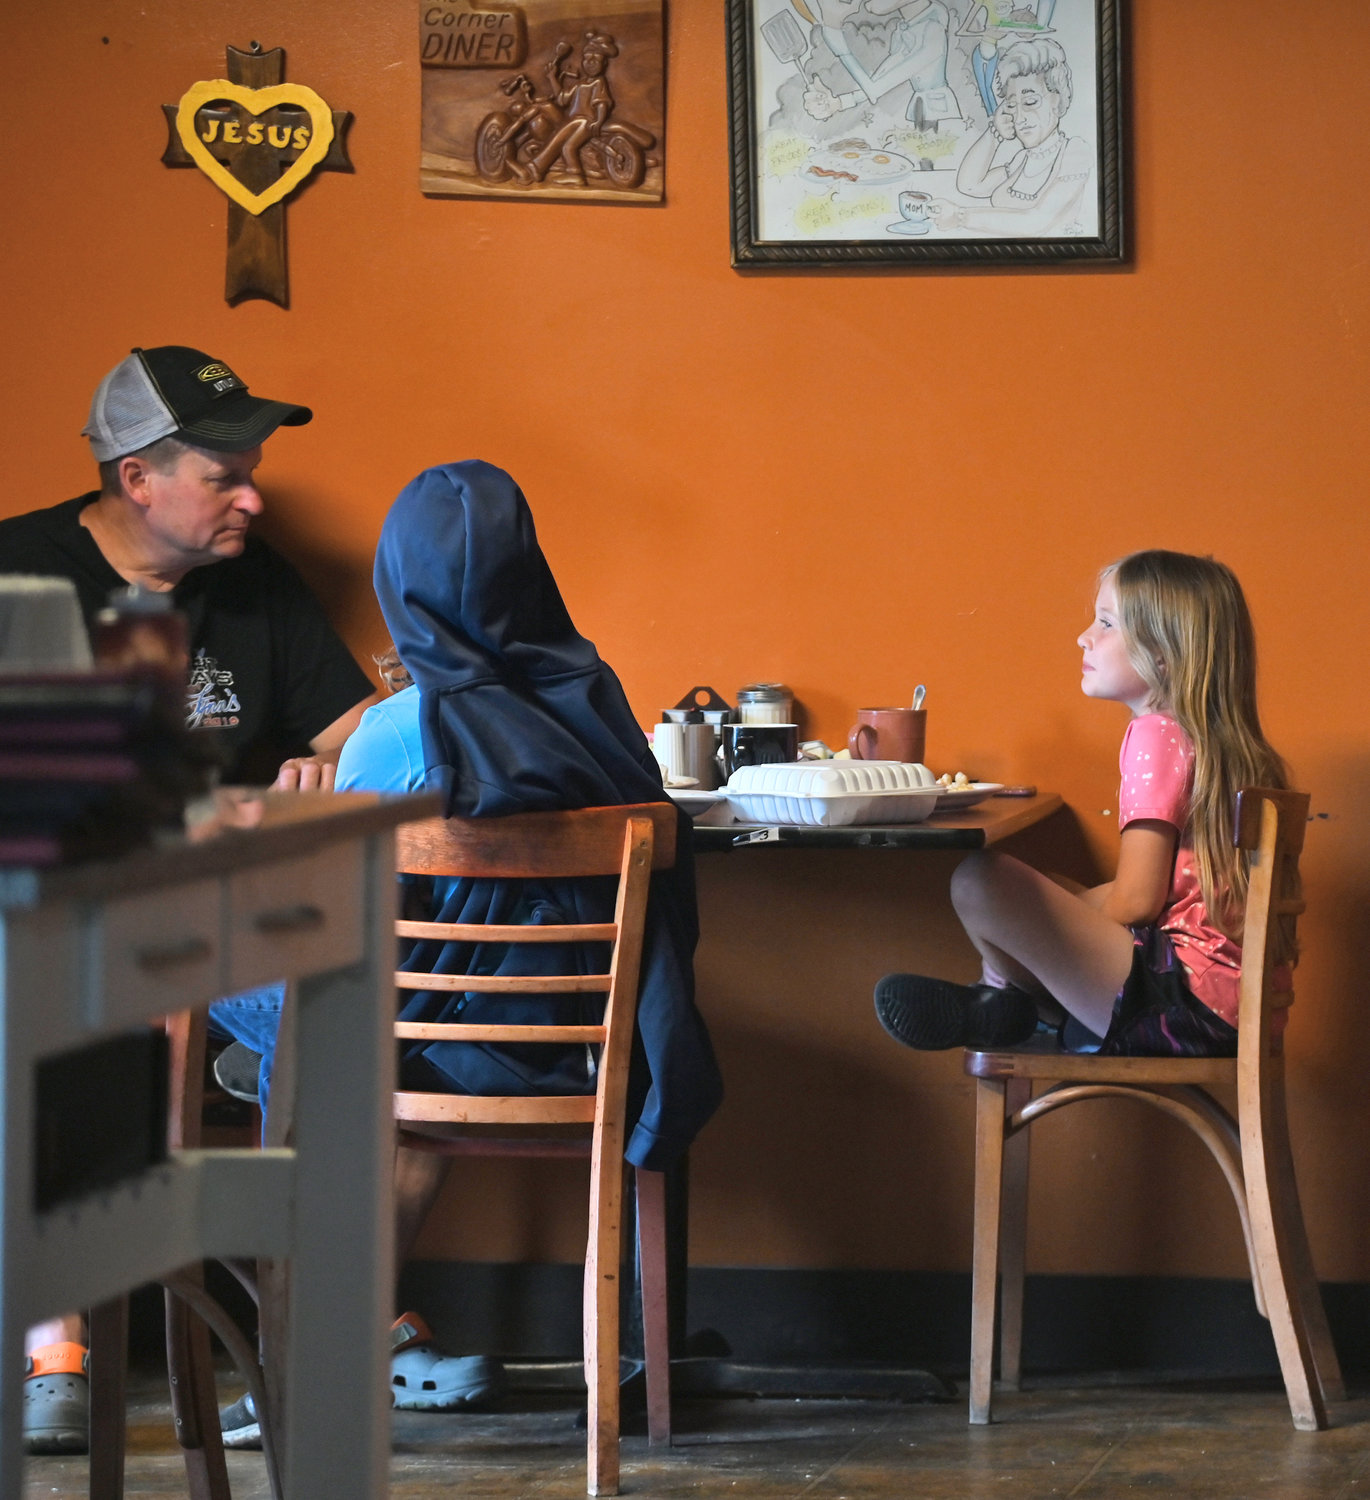 A family enjoys their time at The Corner Diner in Sherrill